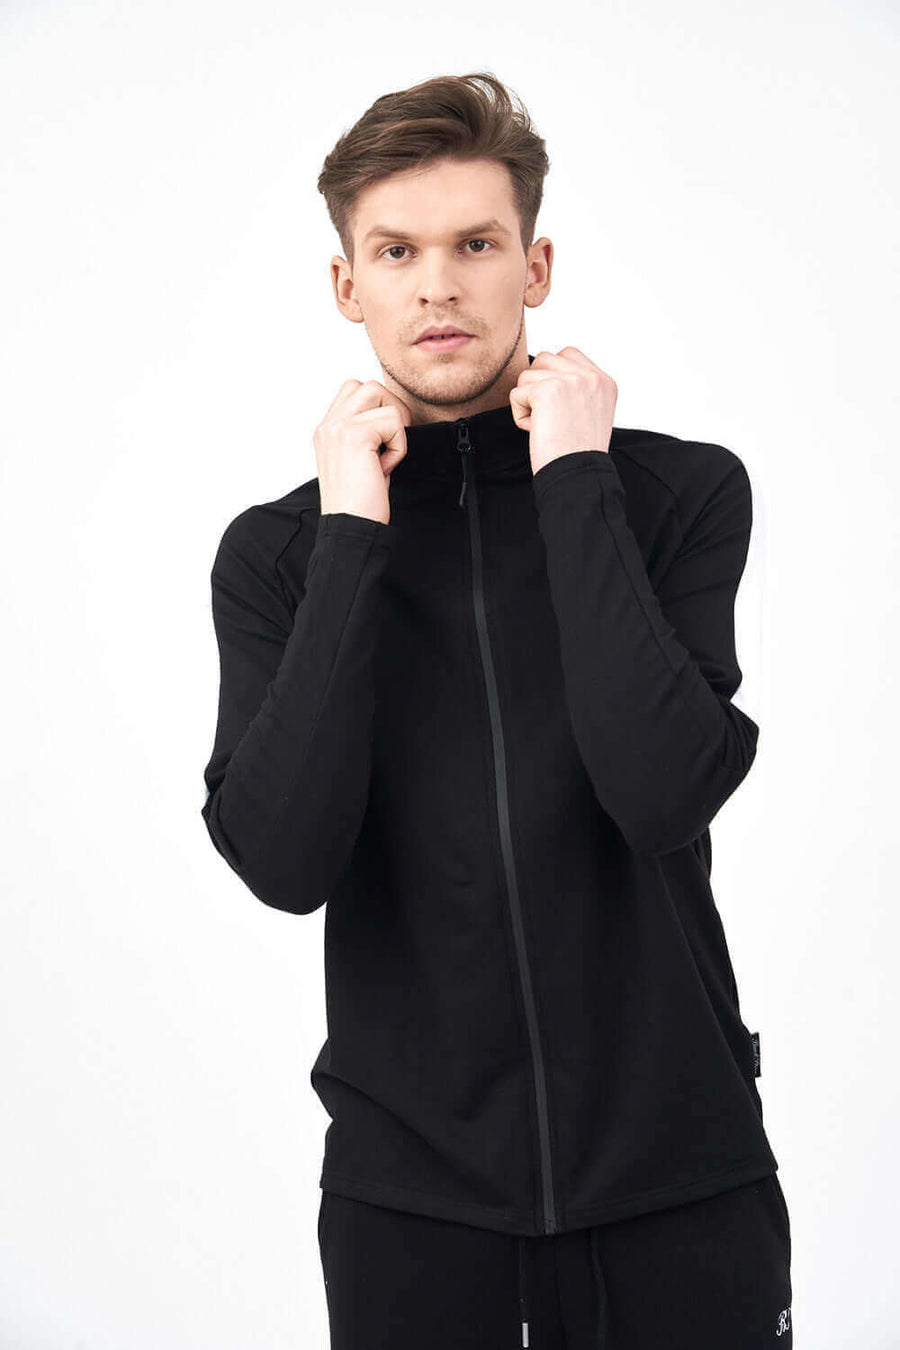 Front View of Full Zippered Funnel Neck Jacket for Men